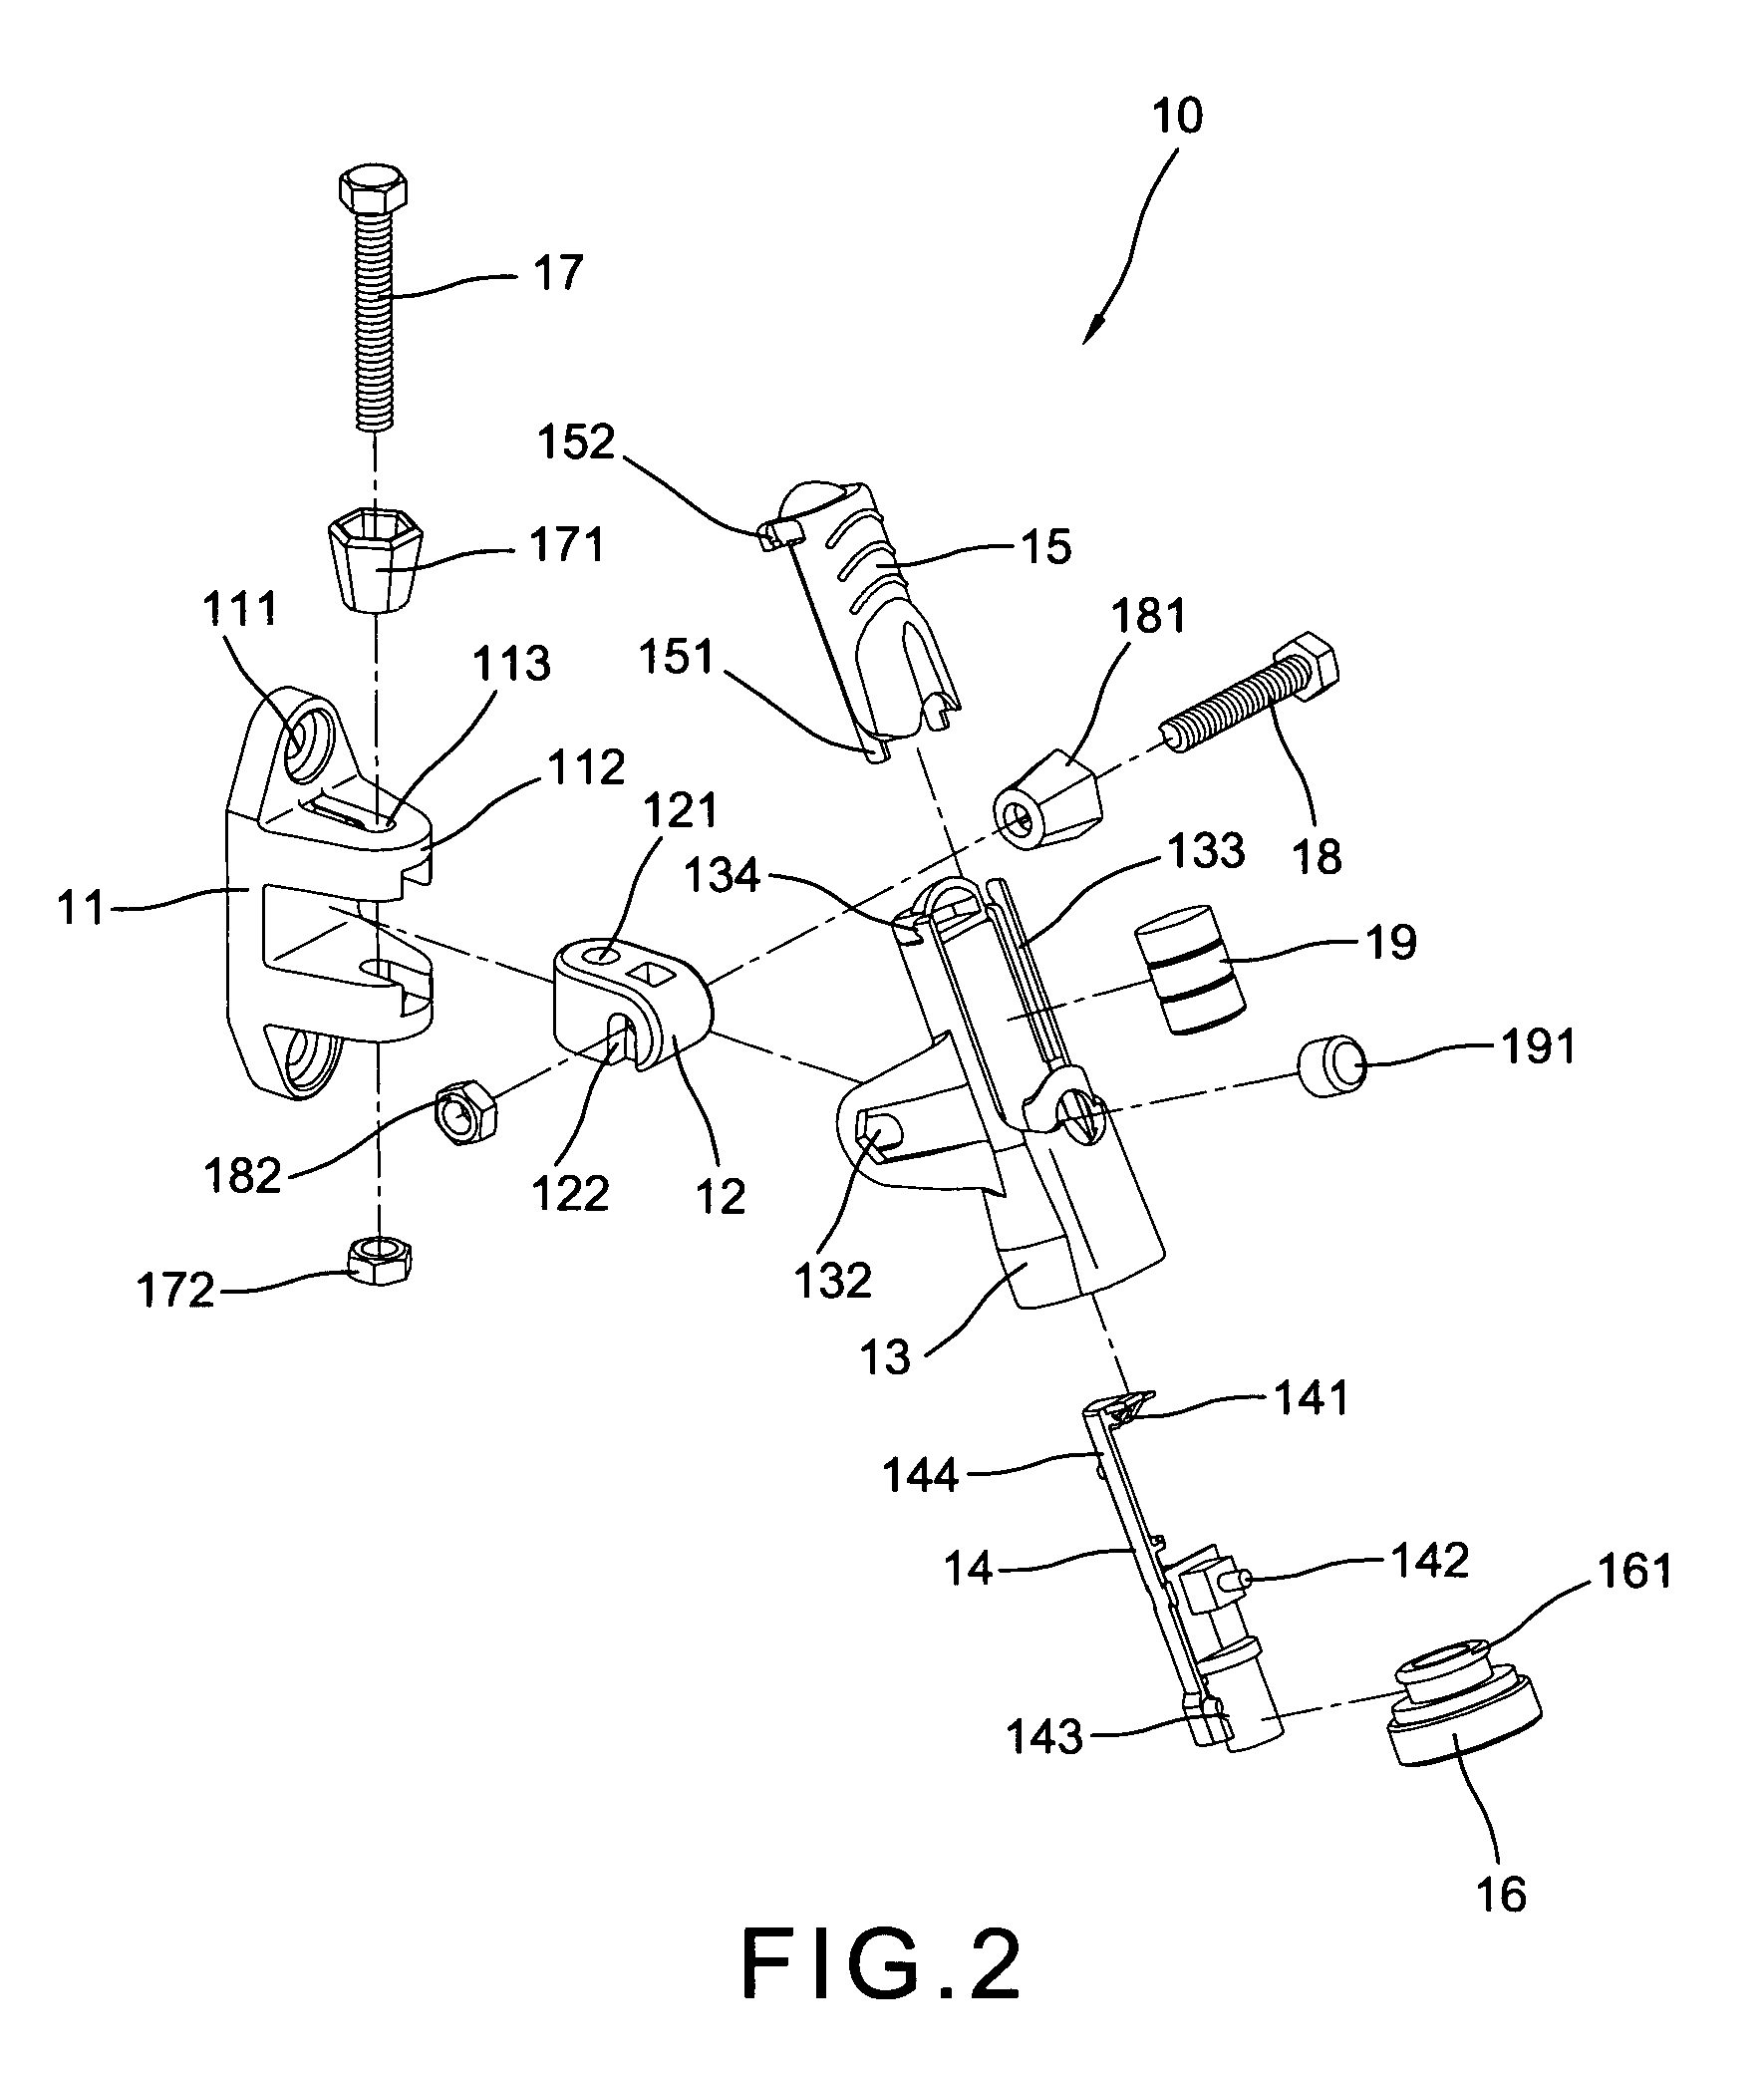 Laser light beam guiding device on a stone cutter